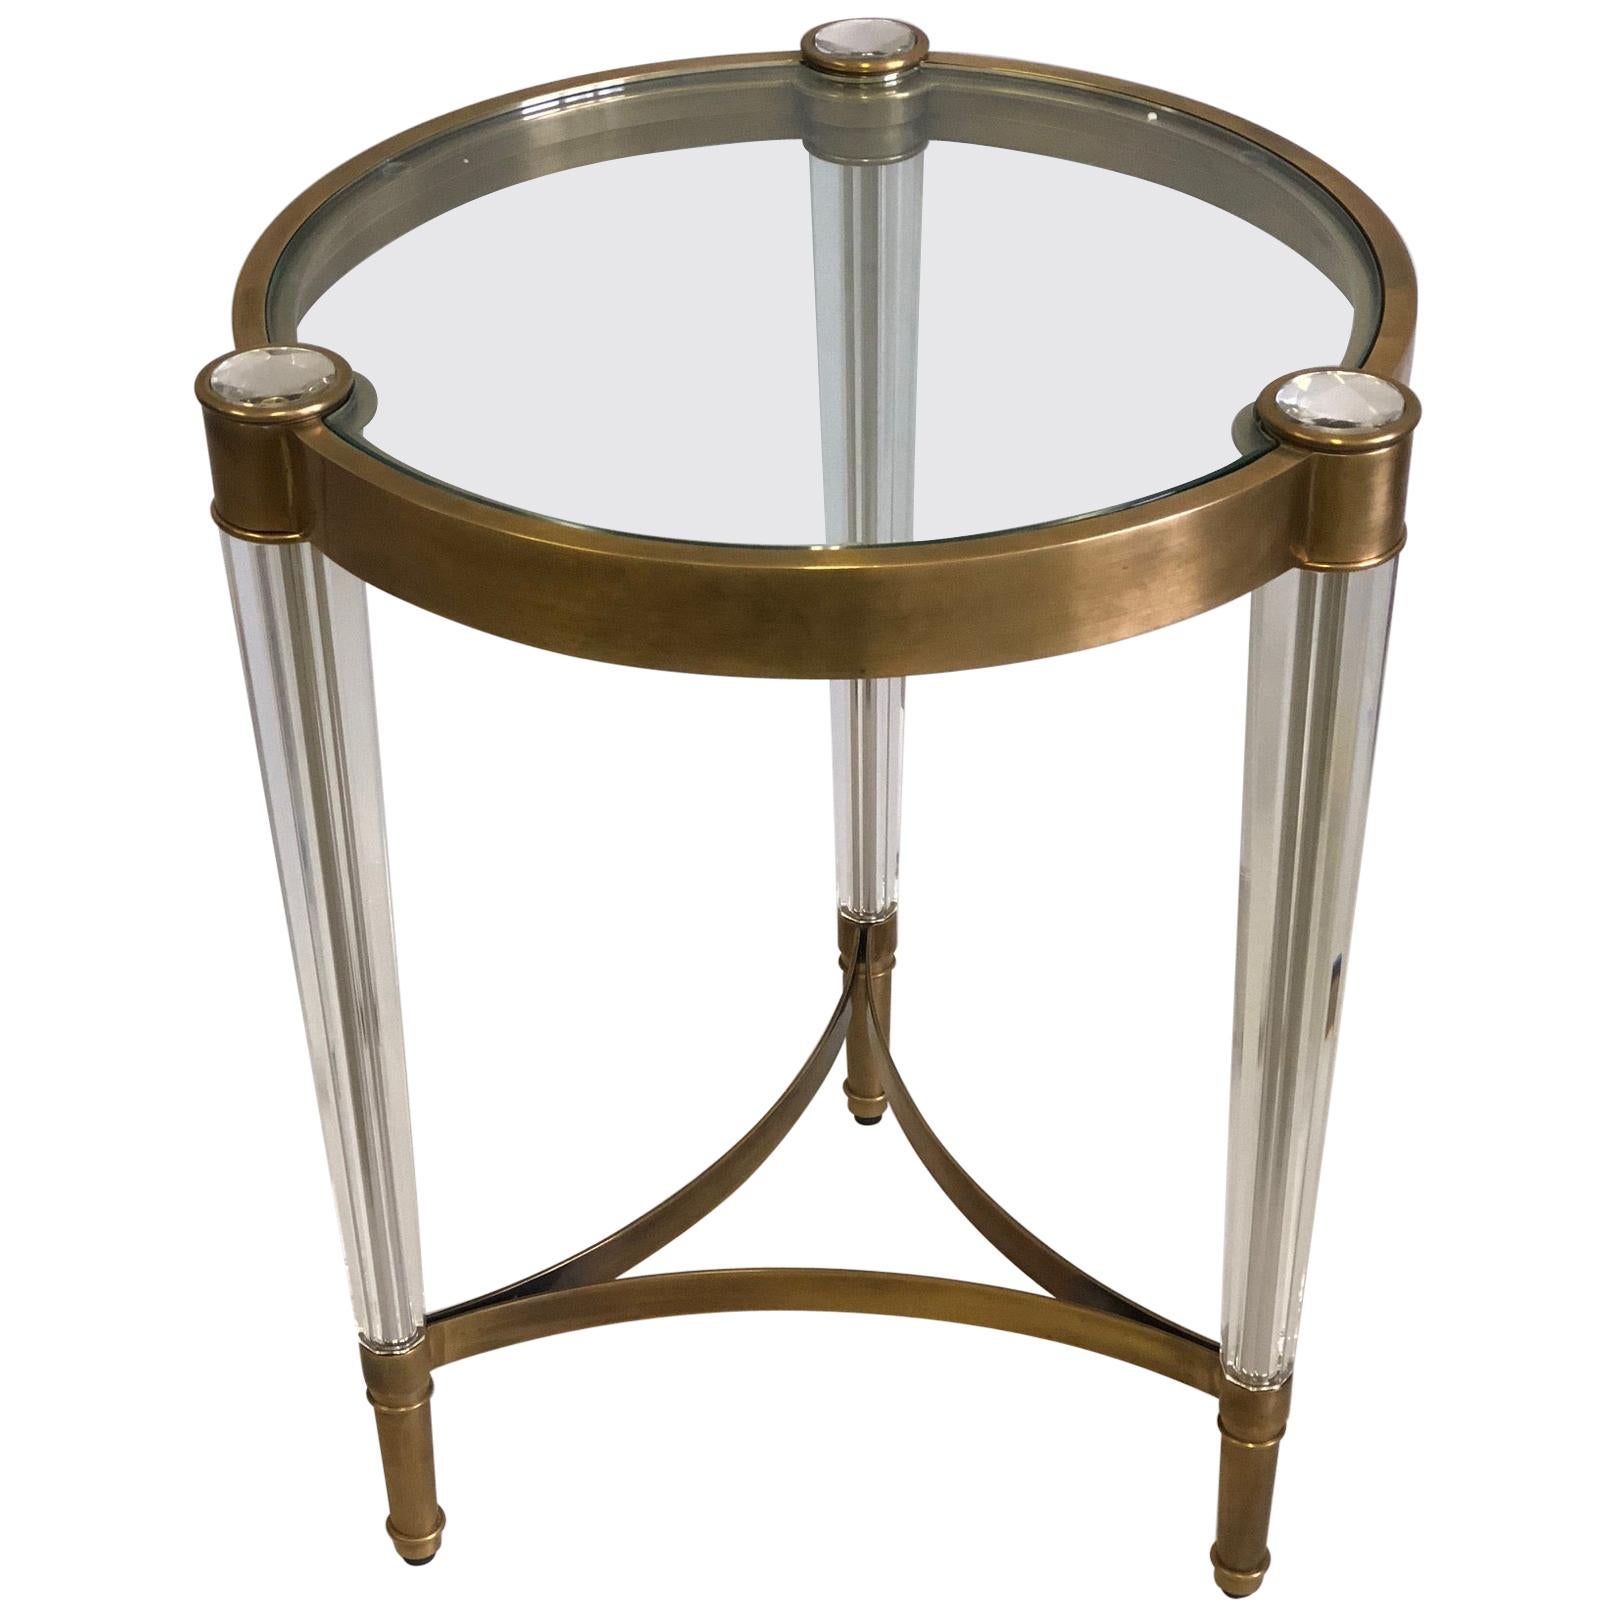 Midcentury Style Solid Brass & Crystal Side Tables, Attributed to Baccarat